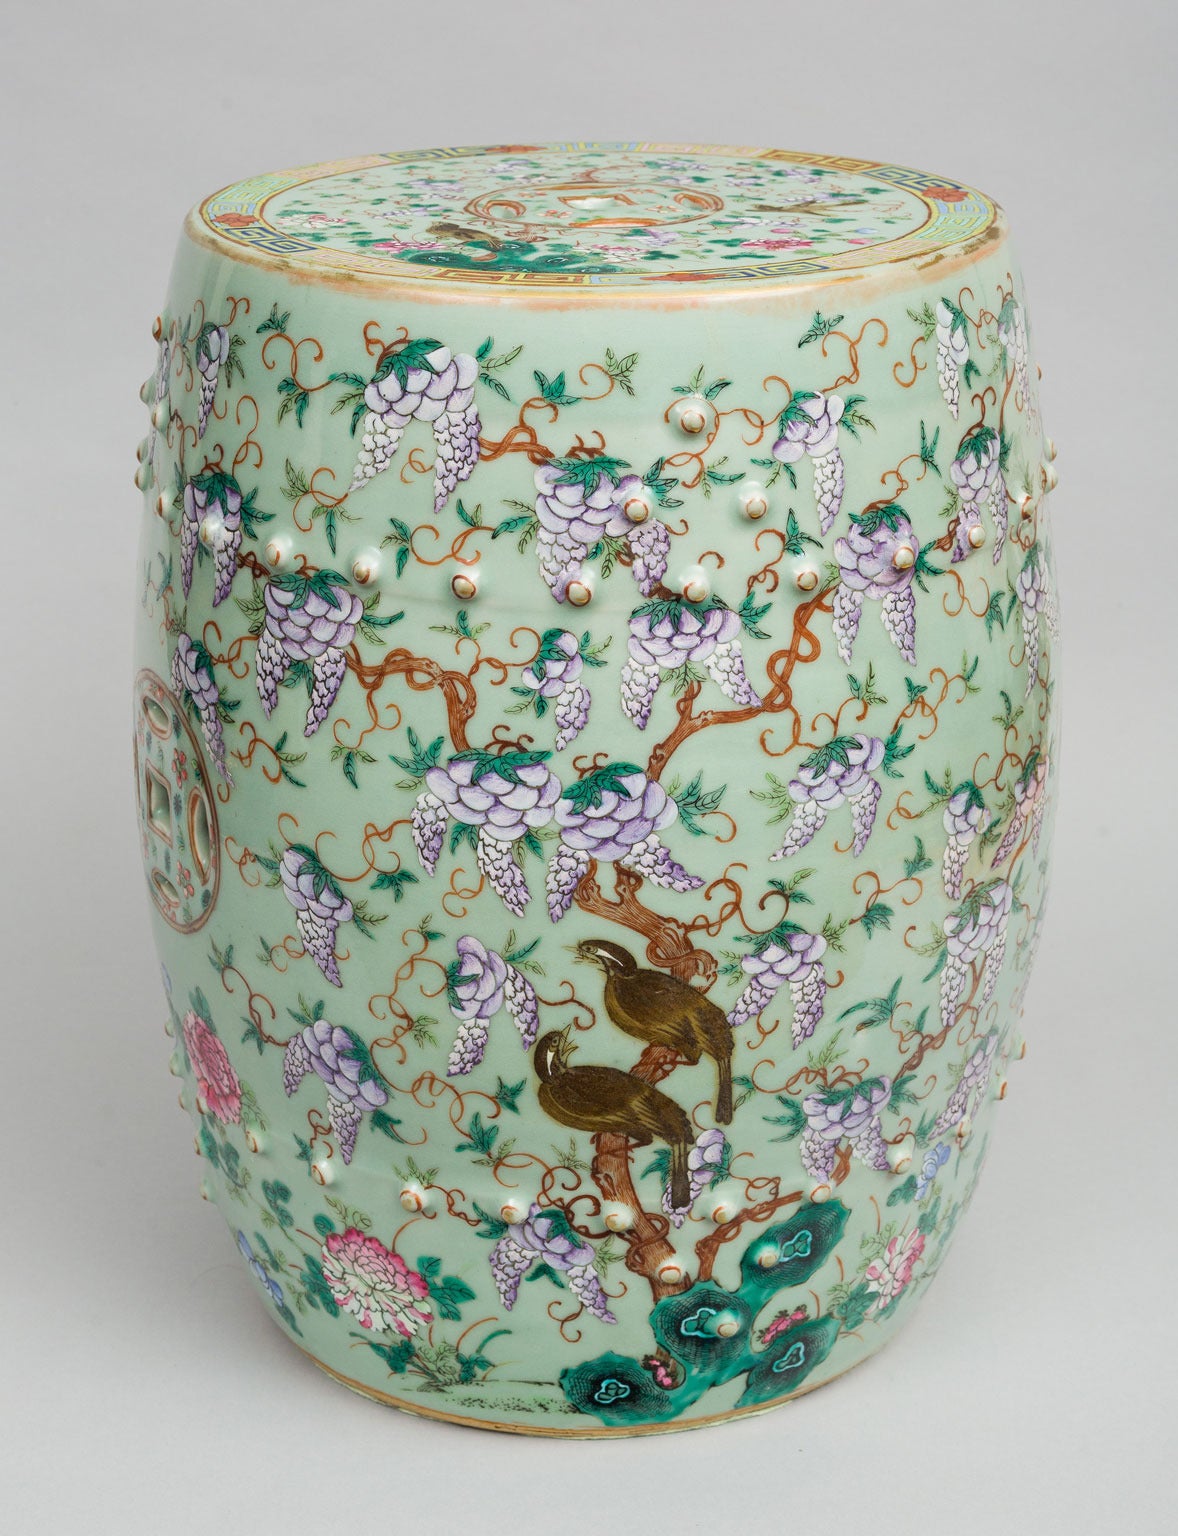 Exceptional Chinese porcelain barrel form garden seat decorated with hanging lavender wisteria blossoms and foliage, birds, chrysanthemums, pierced interlocking double-cash symbols on two sides and molded bands of studs on a celadon green